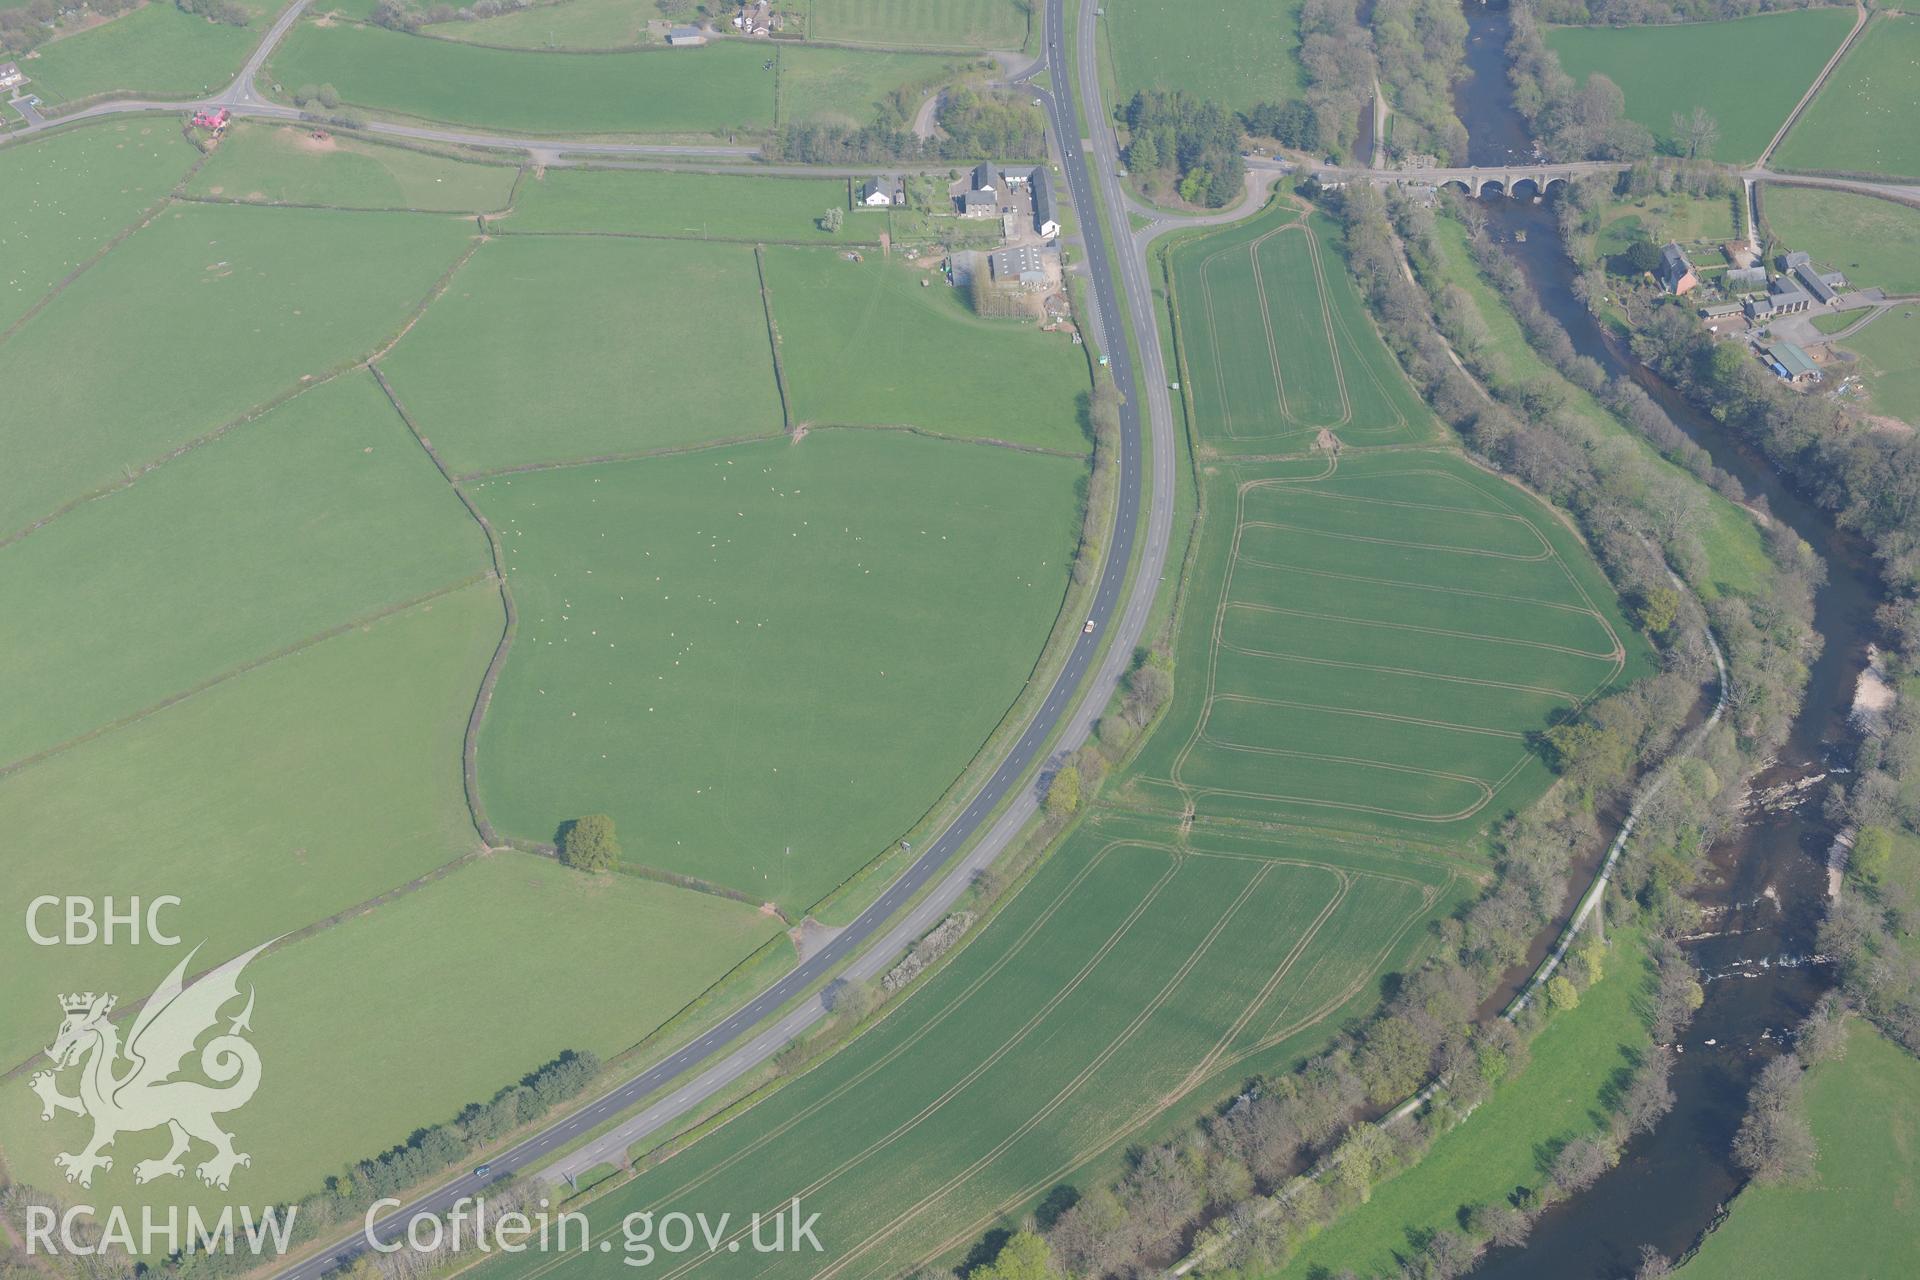 Cefn Brynich Farm, Cefn-Brynich Roman Fort and Lock Road Bridge. Oblique aerial photograph taken during the Royal Commission's programme of archaeological aerial reconnaissance by Toby Driver on 21st April 2015